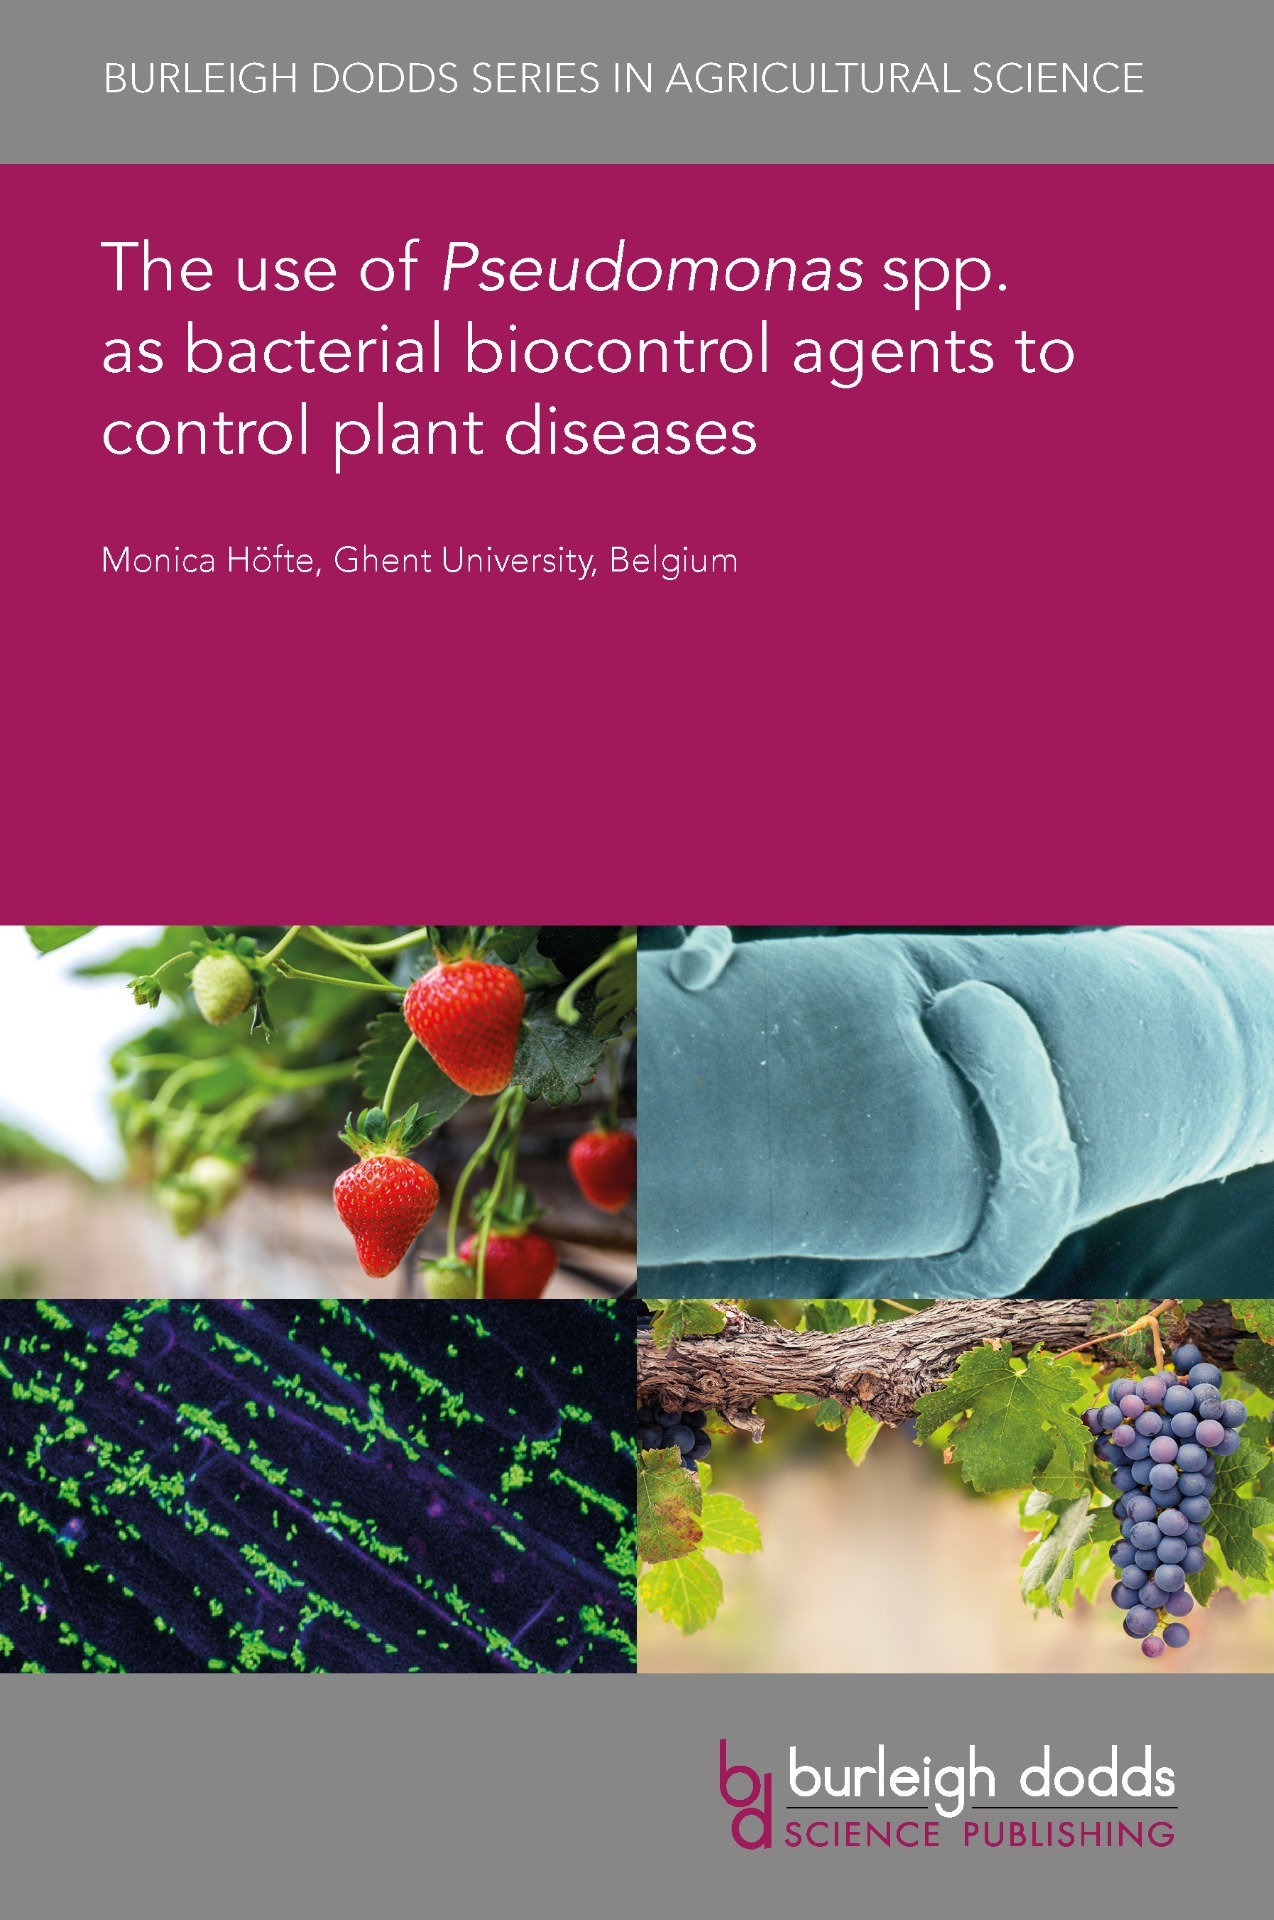 The use of Pseudomonas spp. as bacterial biocontrol agents to control plant disease